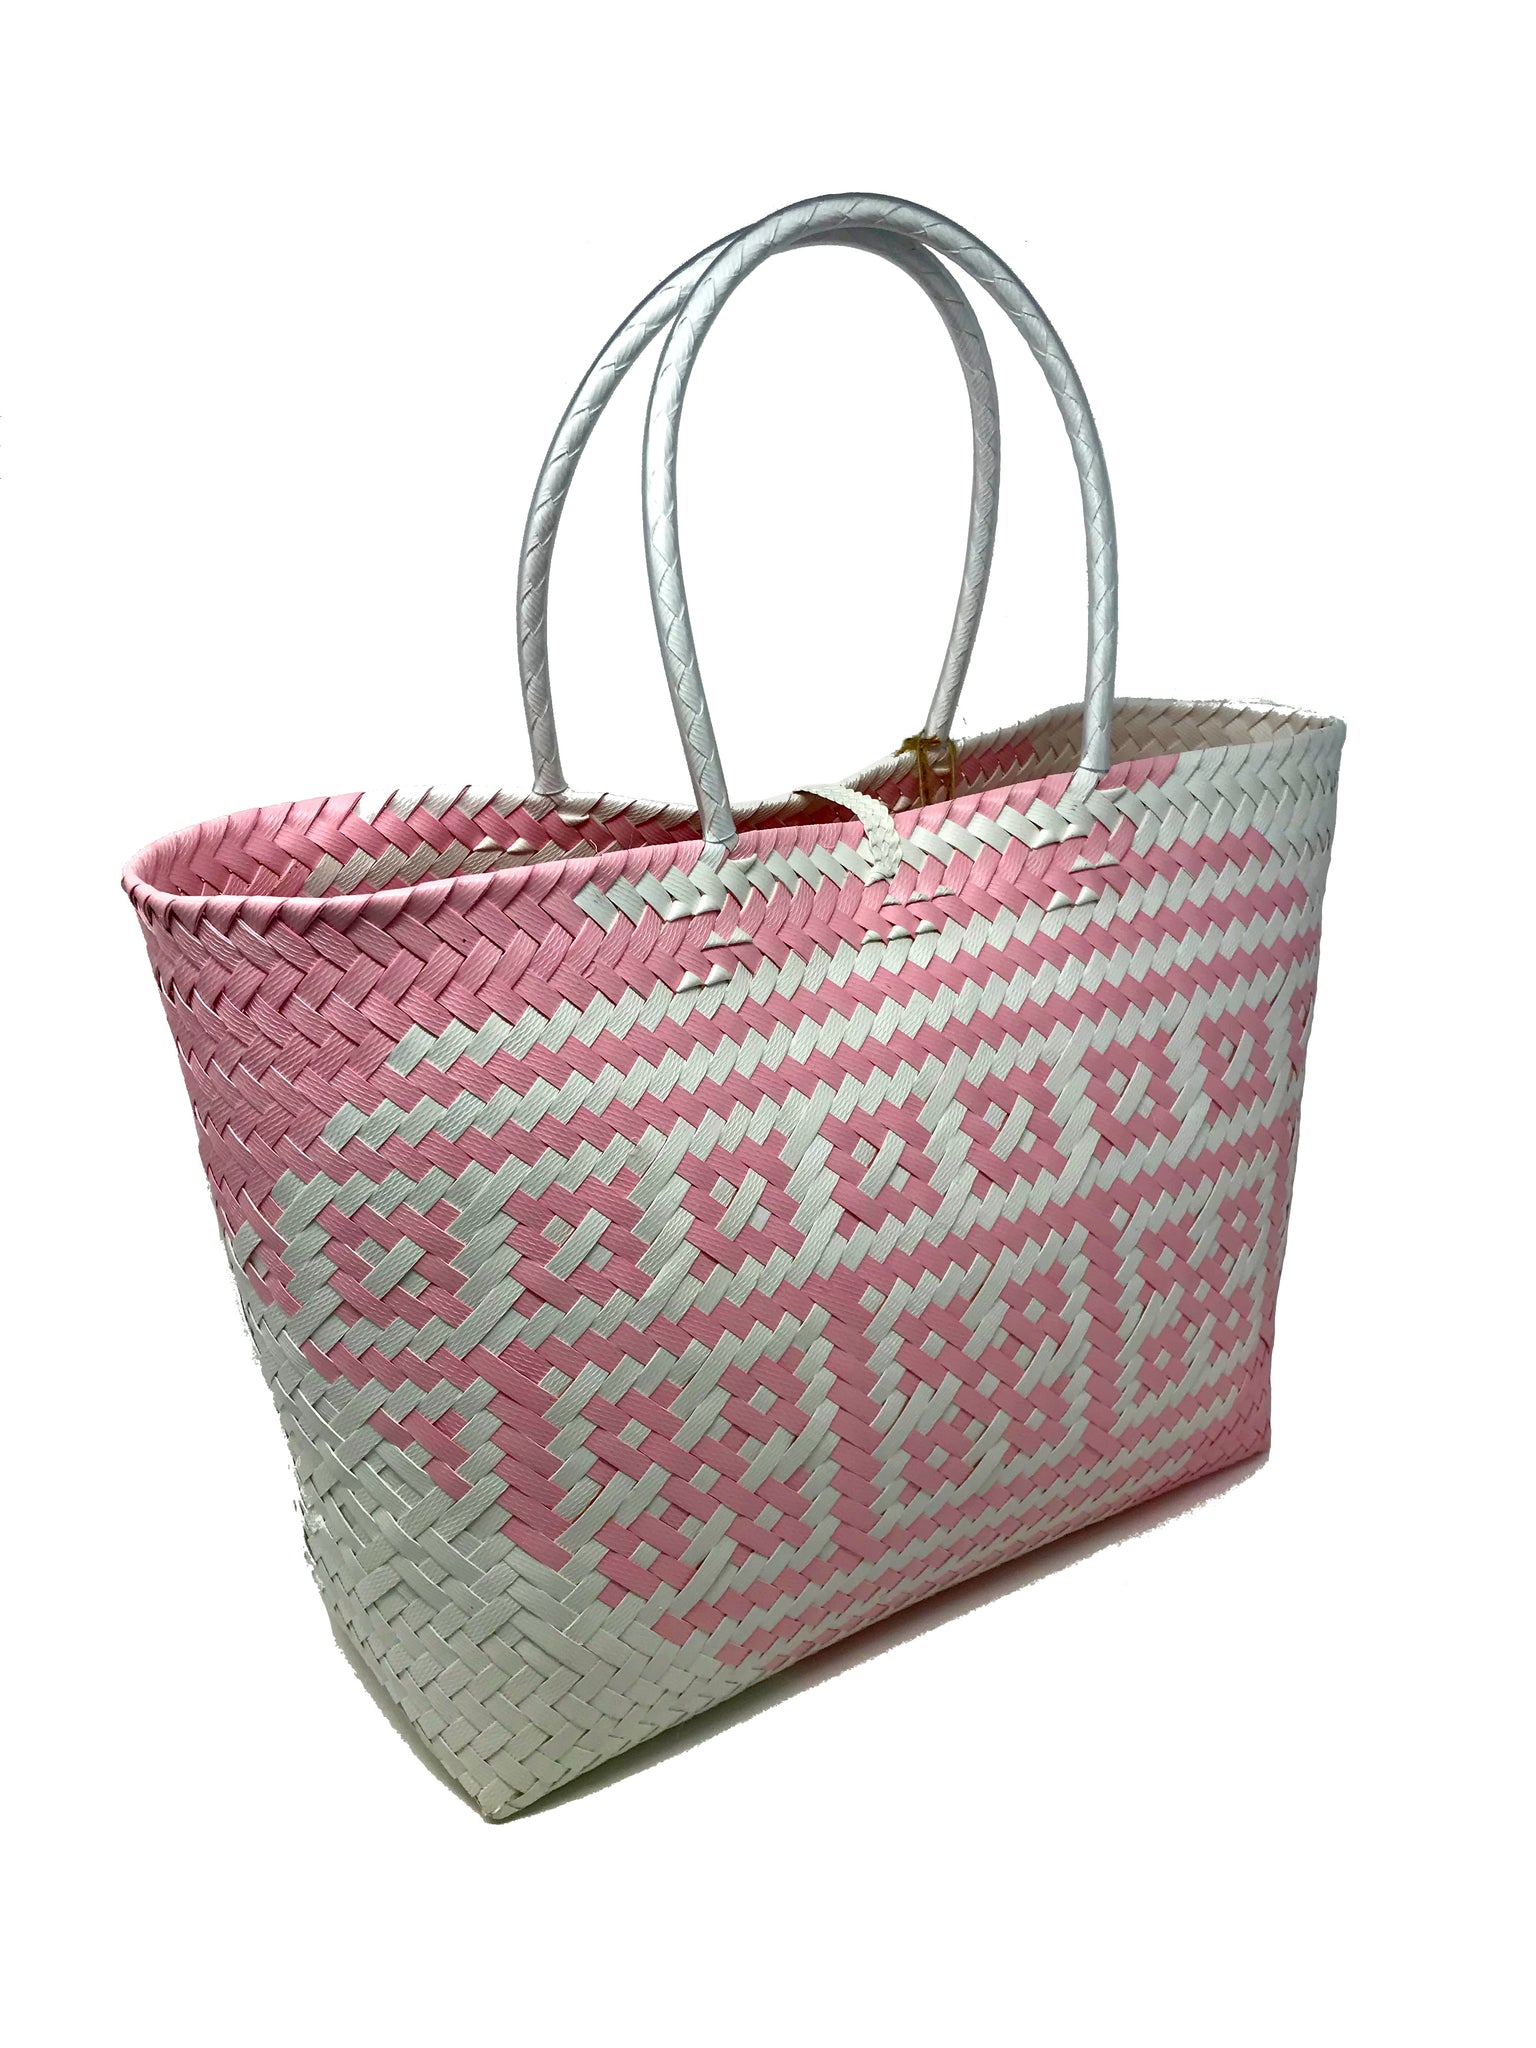 Everyday Tote Bag - Pink & White 2